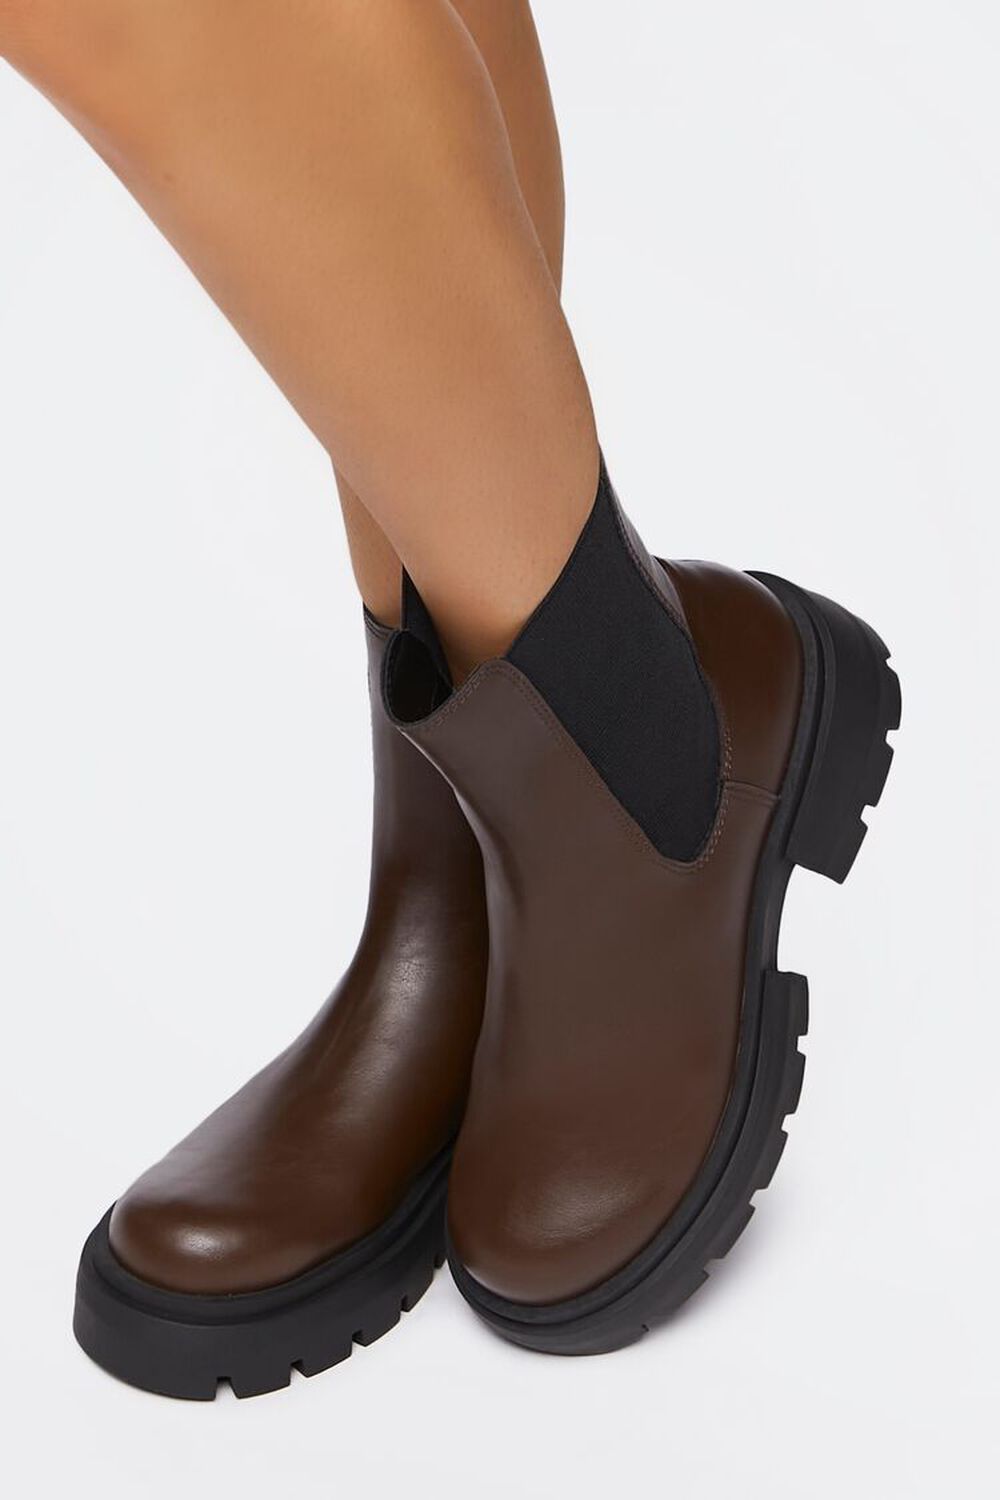 BROWN Faux Leather Chelsea Boots, image 1